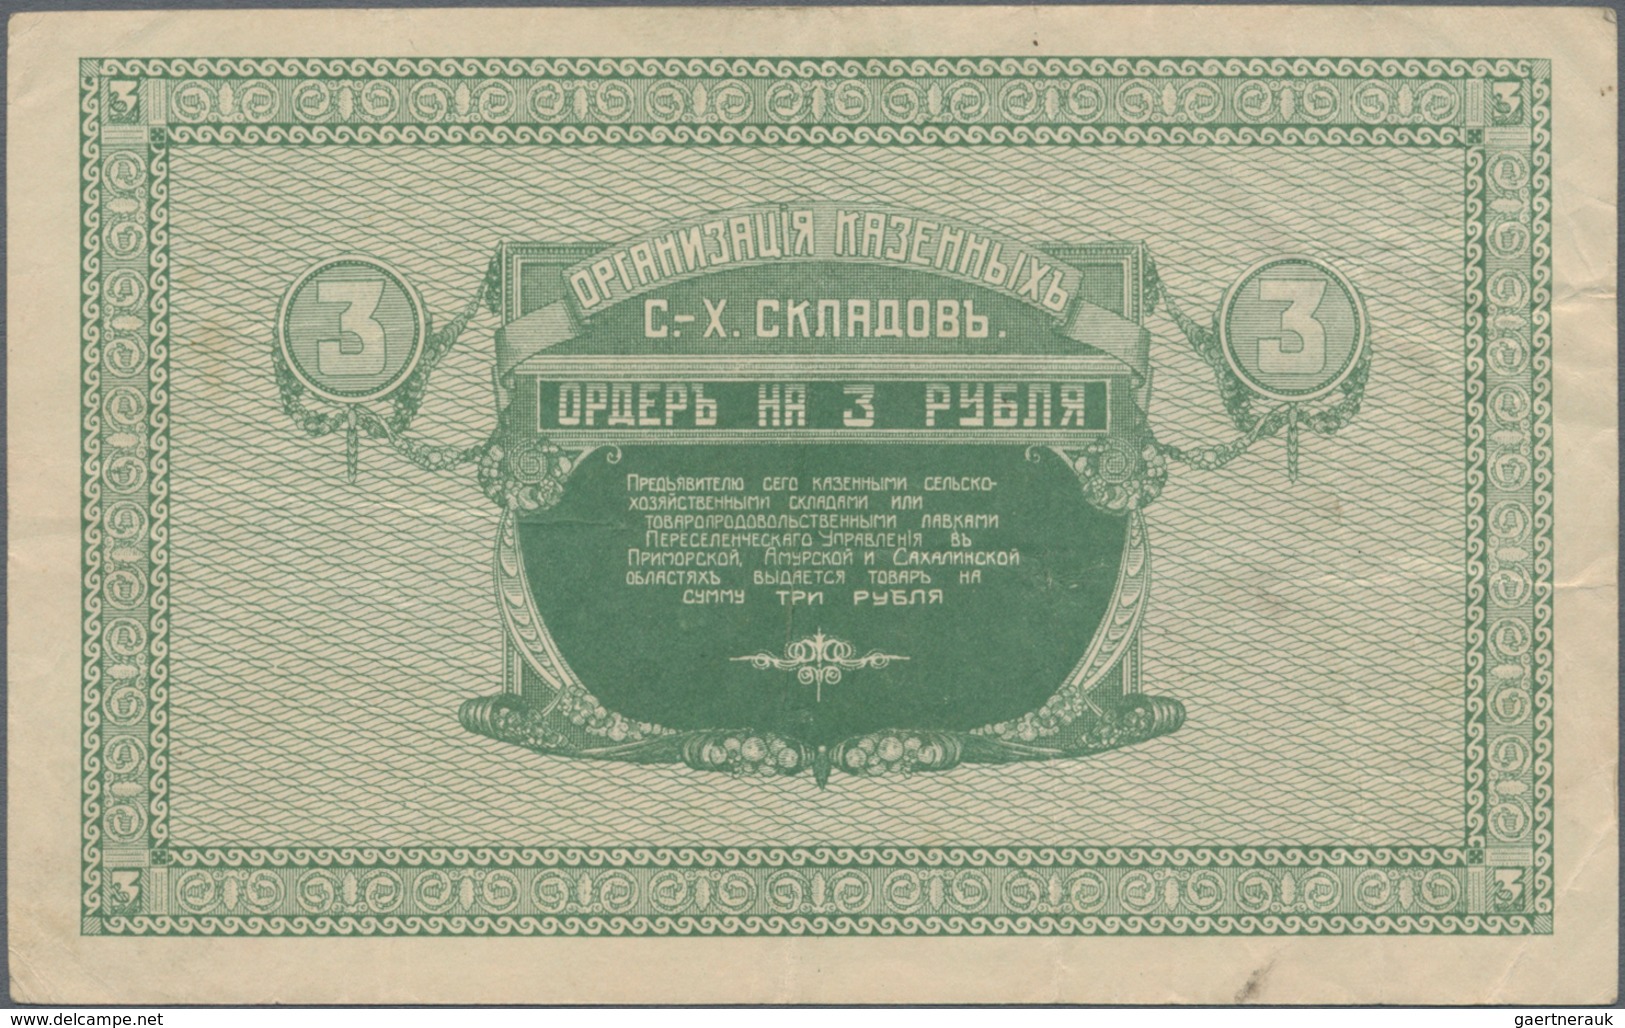 Russia / Russland: East Siberia - Primorye Region set with 5 banknotes 1, 3, 10, 20 and 100 Rubles N